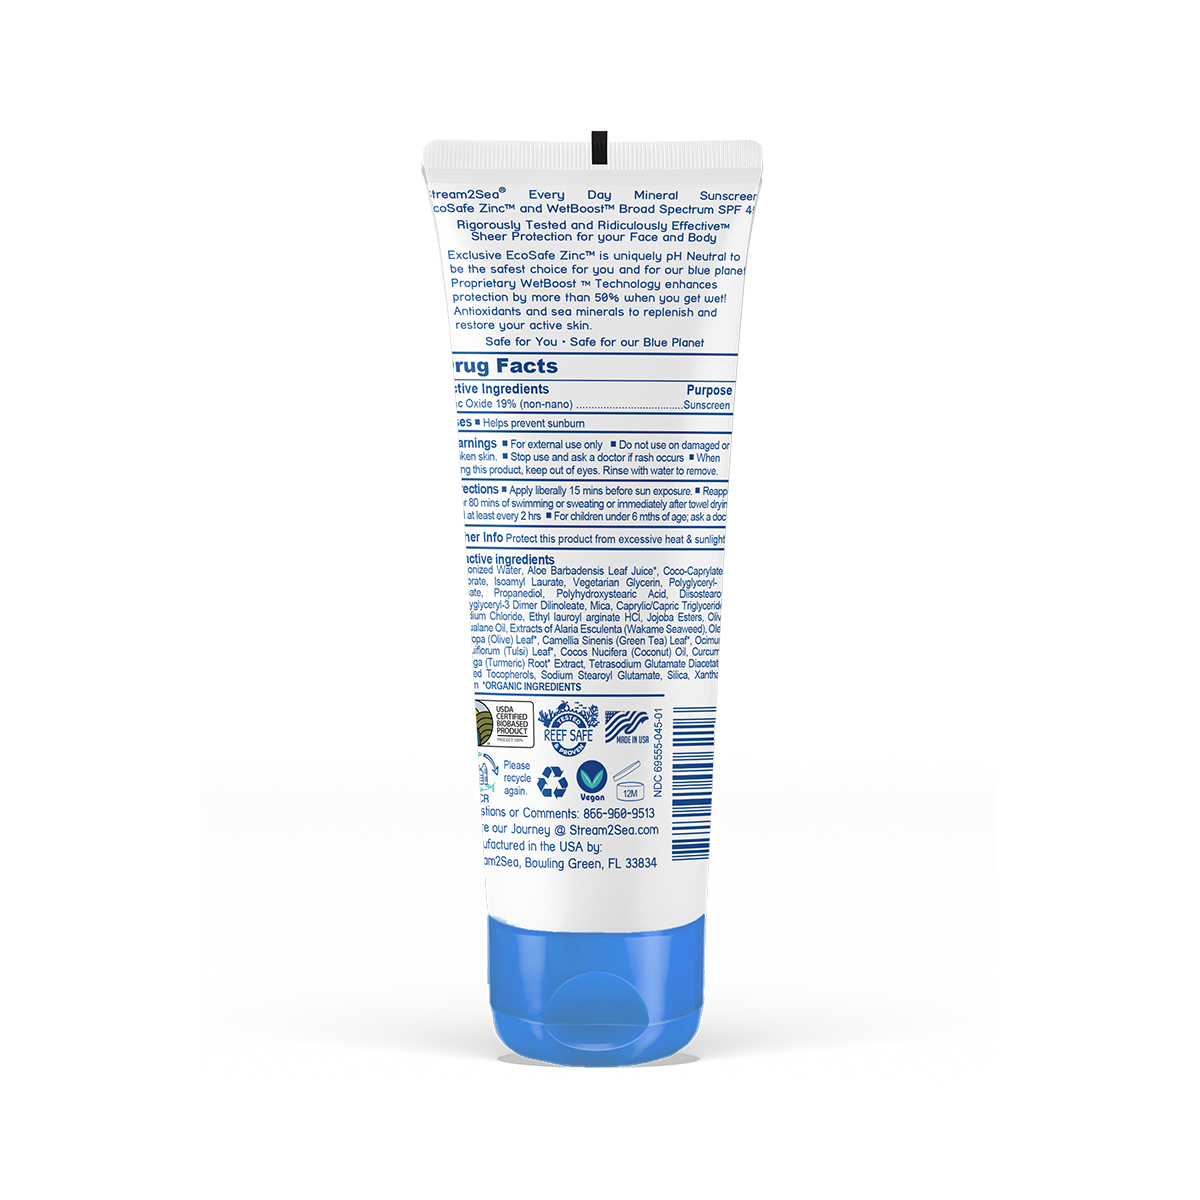 Every Day Mineral Sunscreen Product Back - Stream2Sea